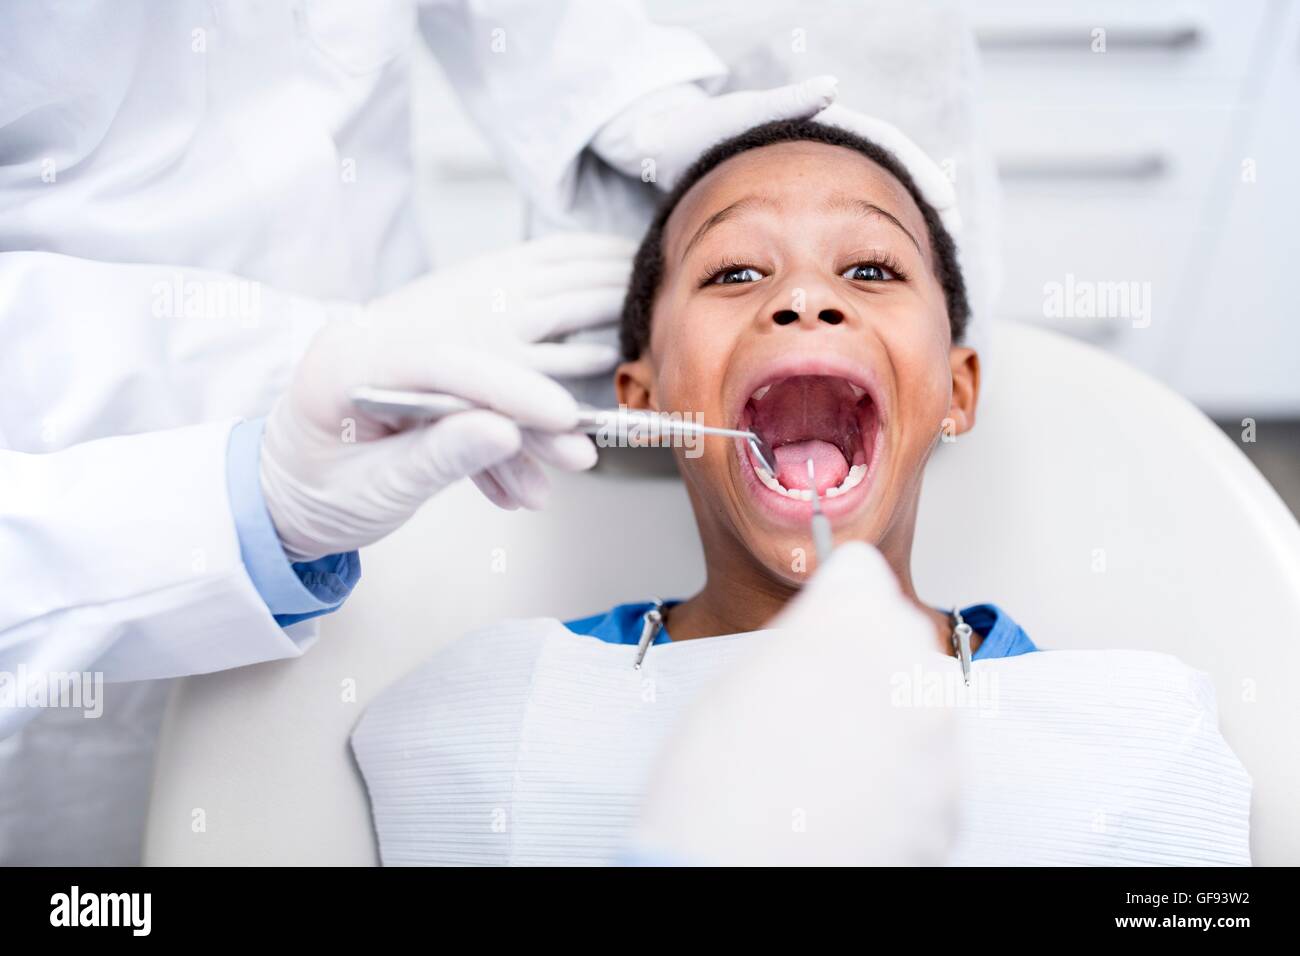 MODEL RELEASED. Doctor examining boy's teeth in clinic. Stock Photo